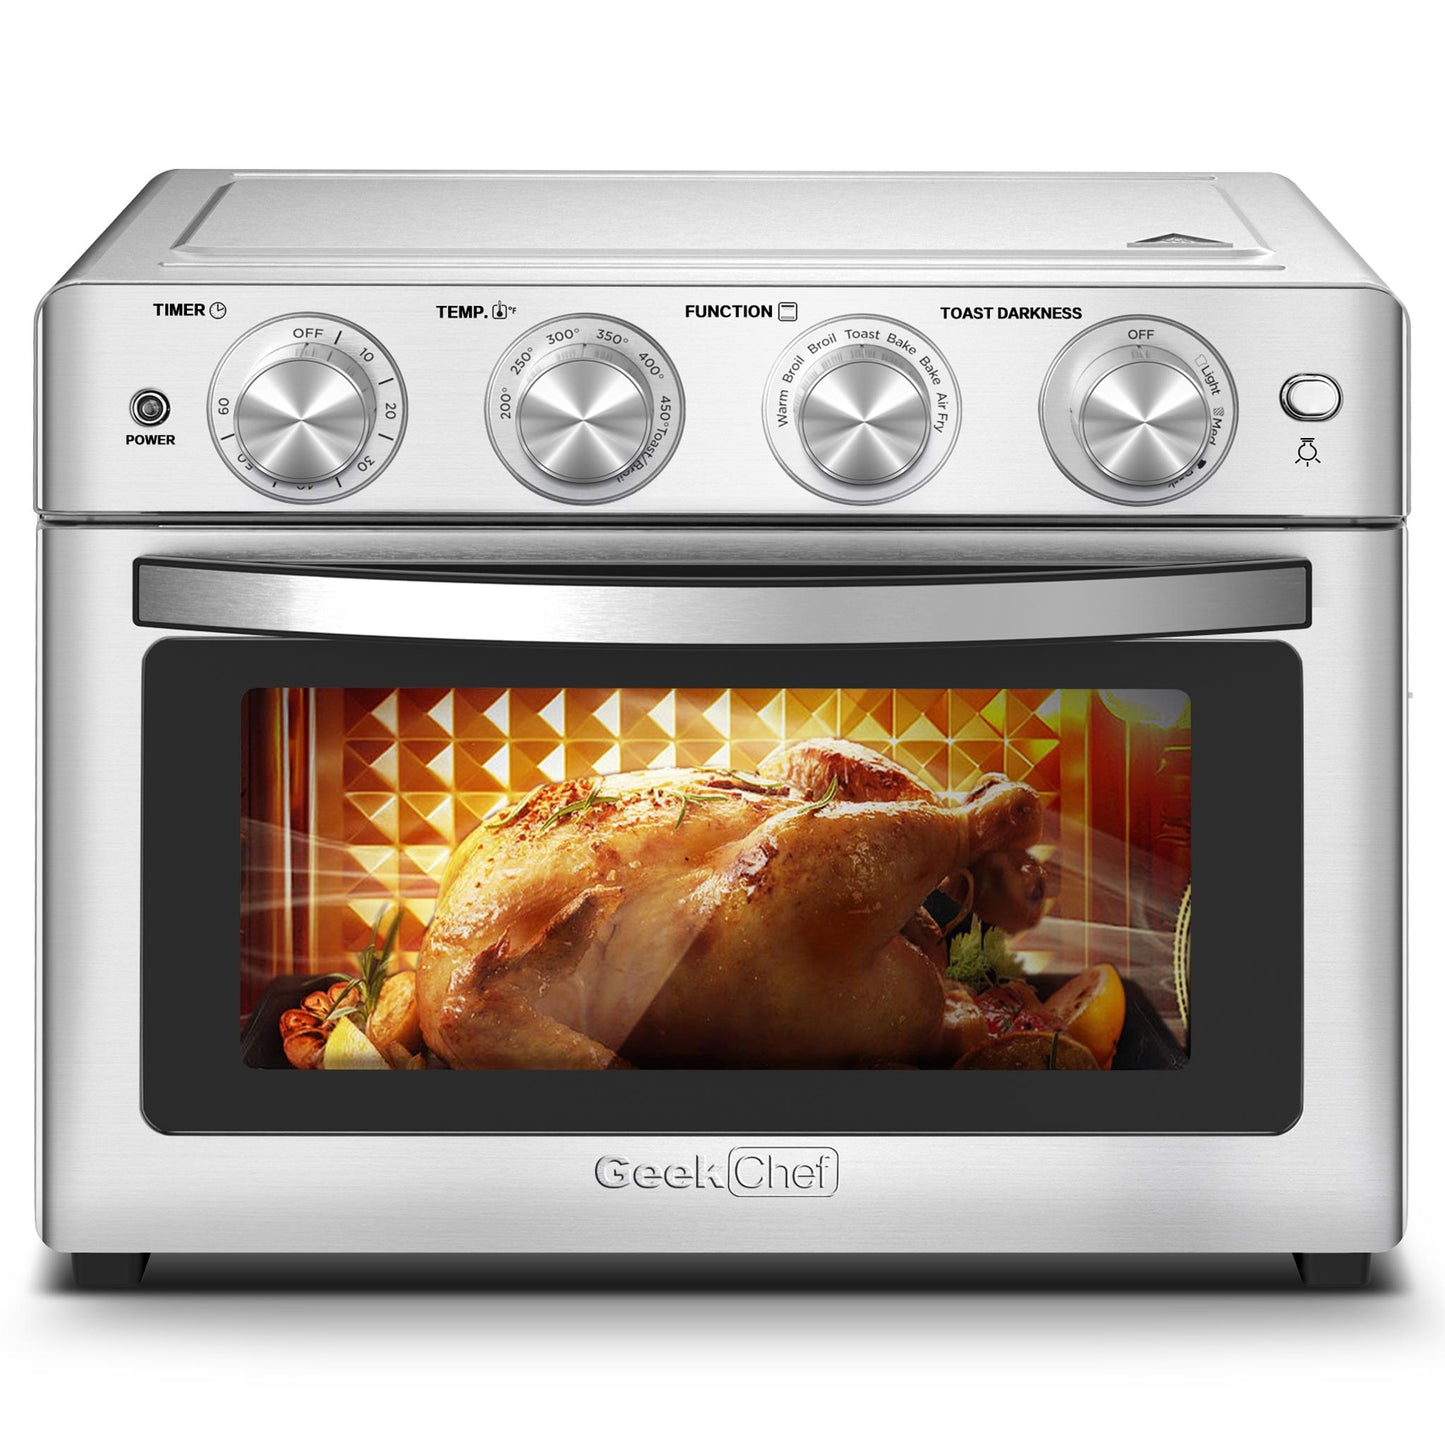 Geek Chef 26QT/26L Air Fryer Oven Combo, 6 Slice, Oil-Free Cooking